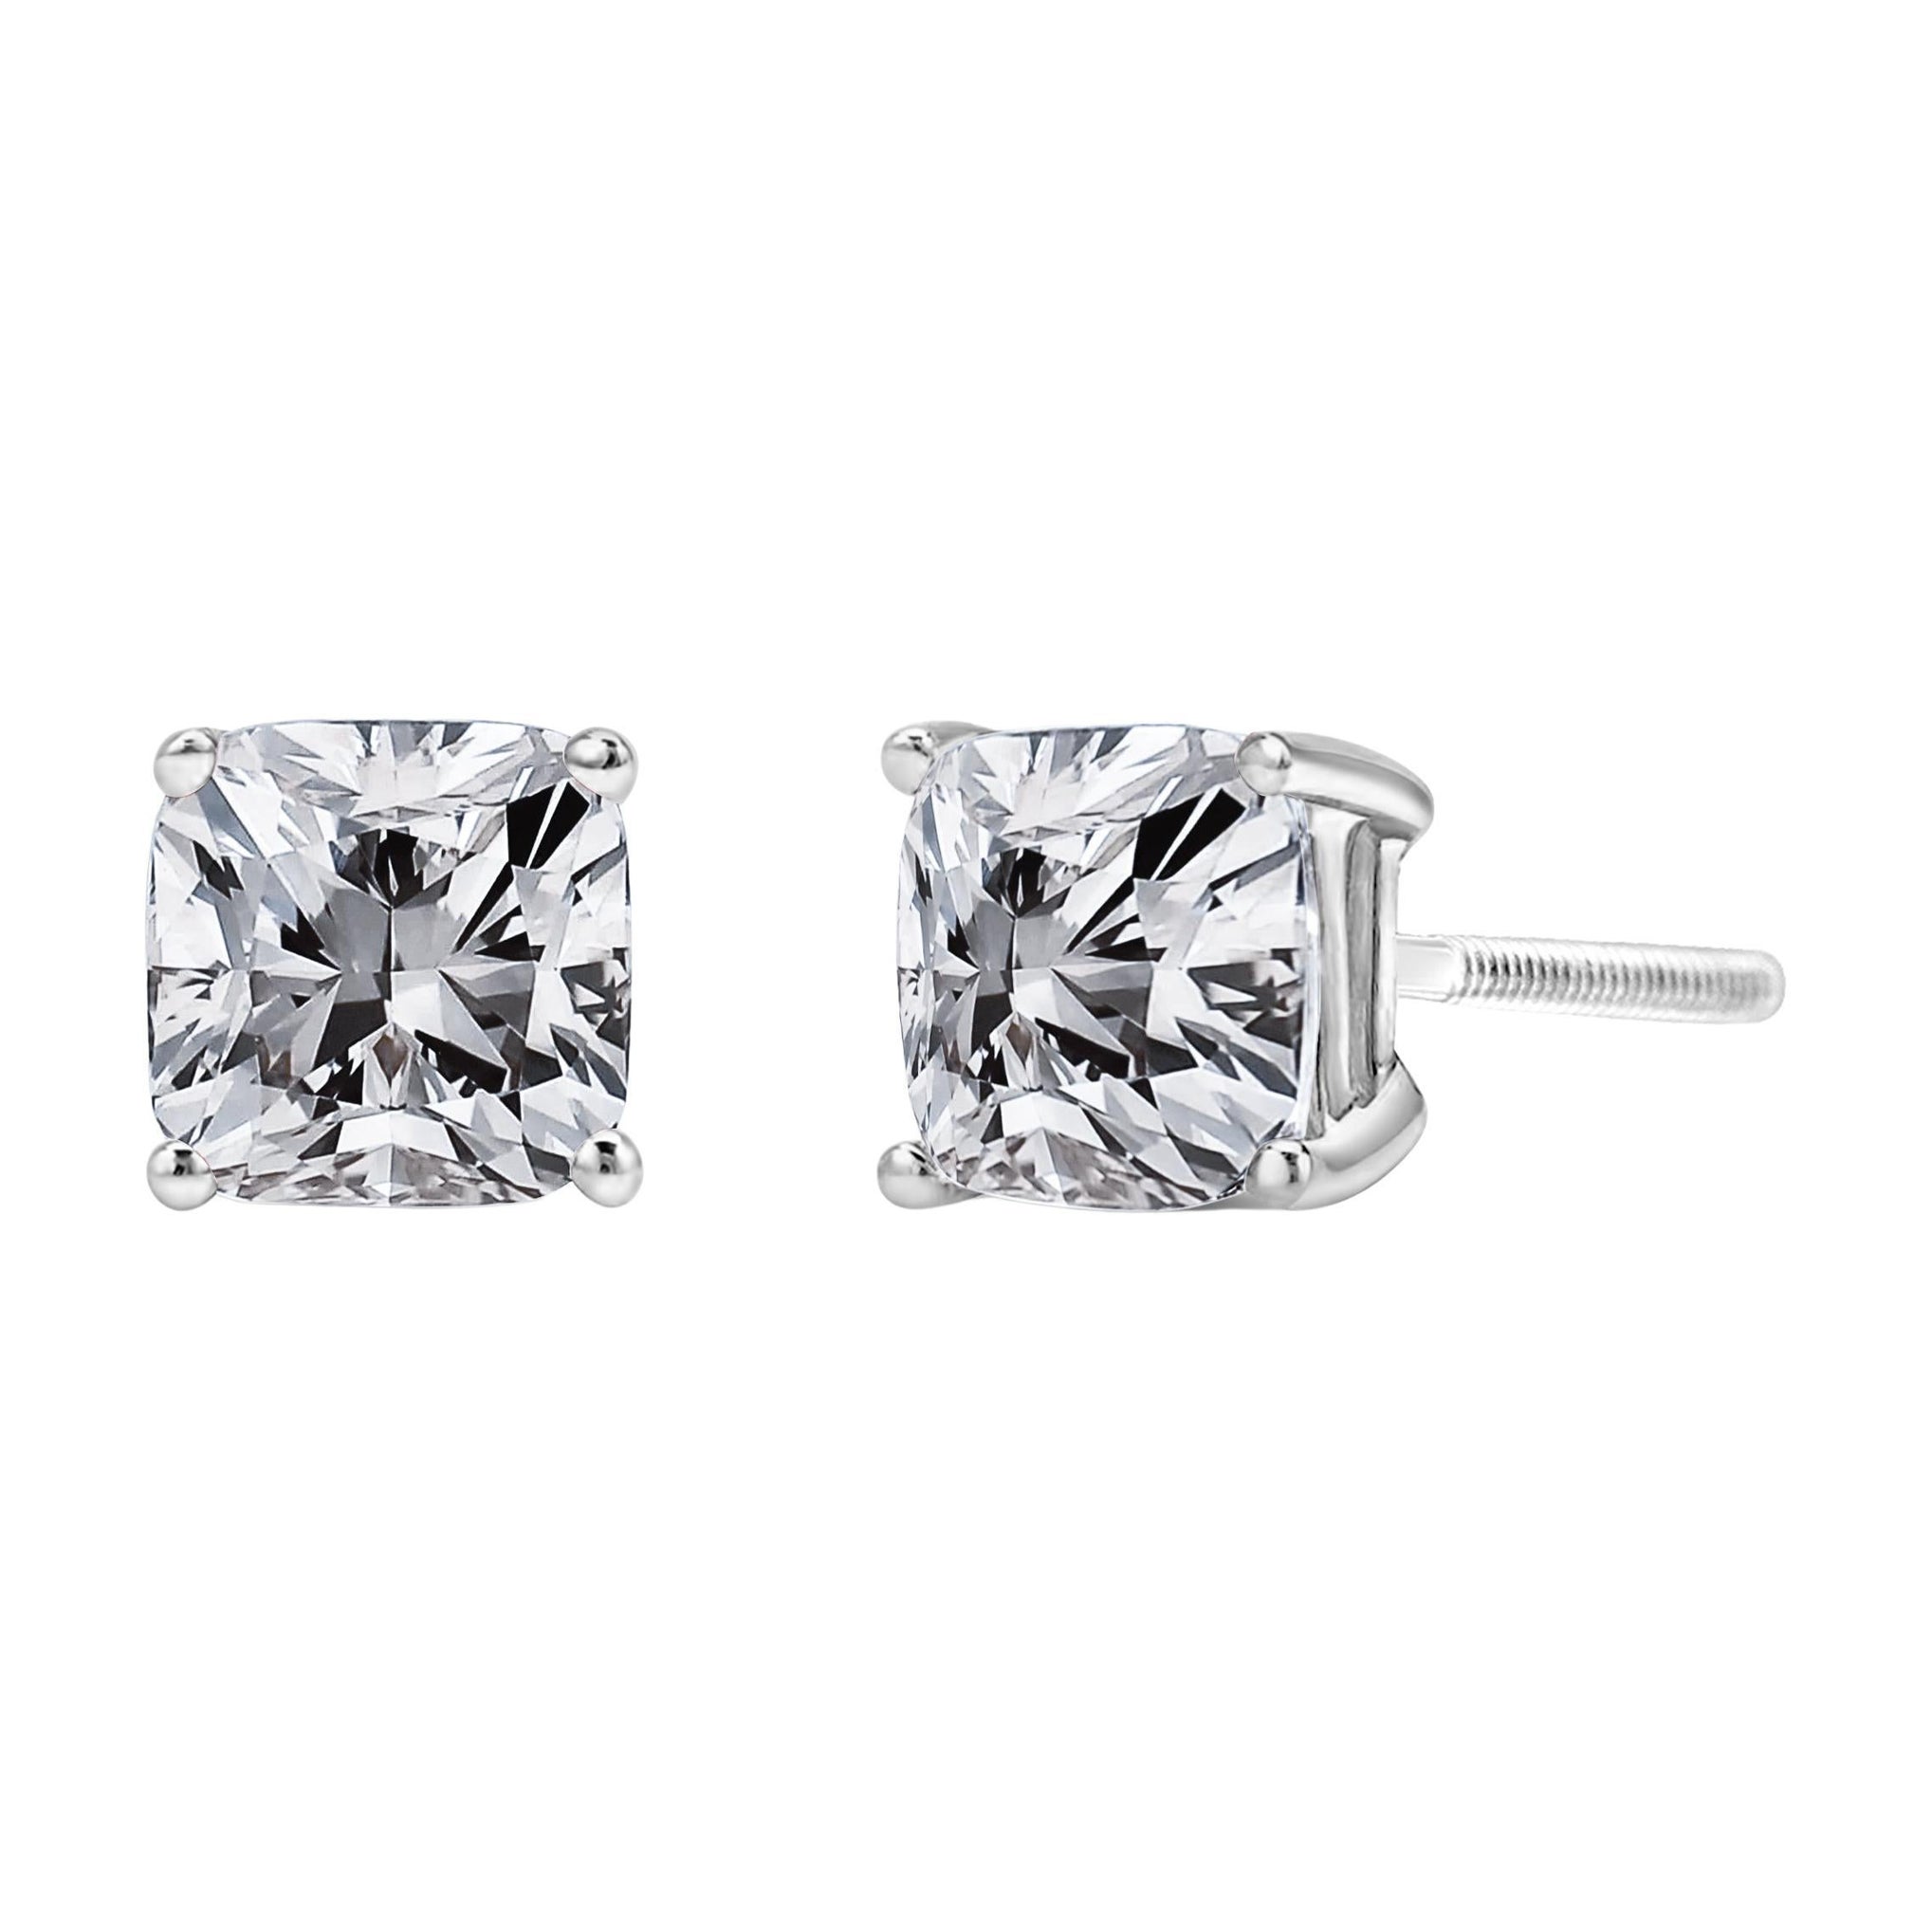 14K White Gold 1 1/2 Carat Clarity Enhanced Diamond Solitaire Stud Earrings For Sale